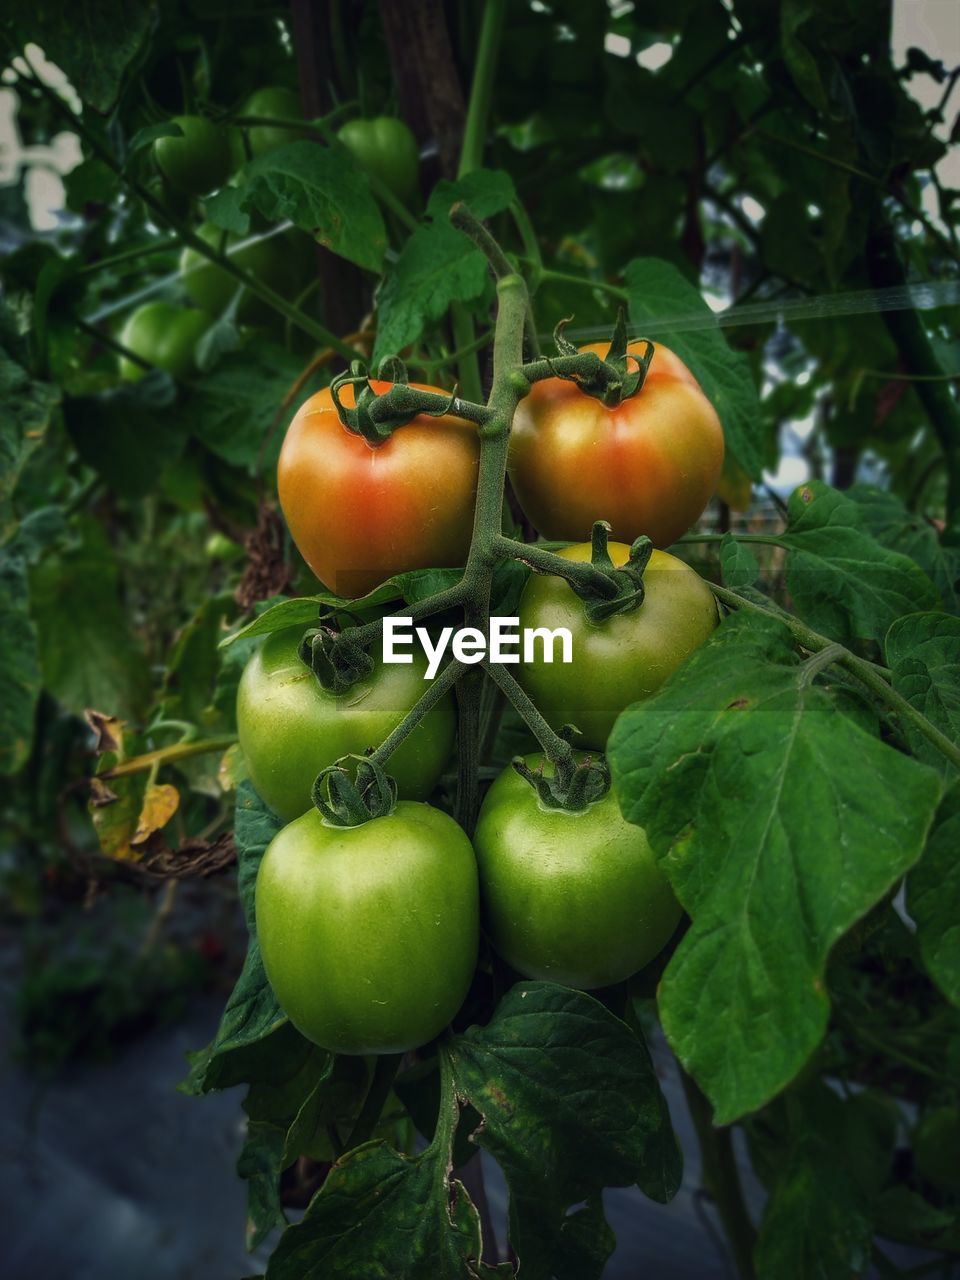 CLOSE-UP OF TOMATOES ON PLANT